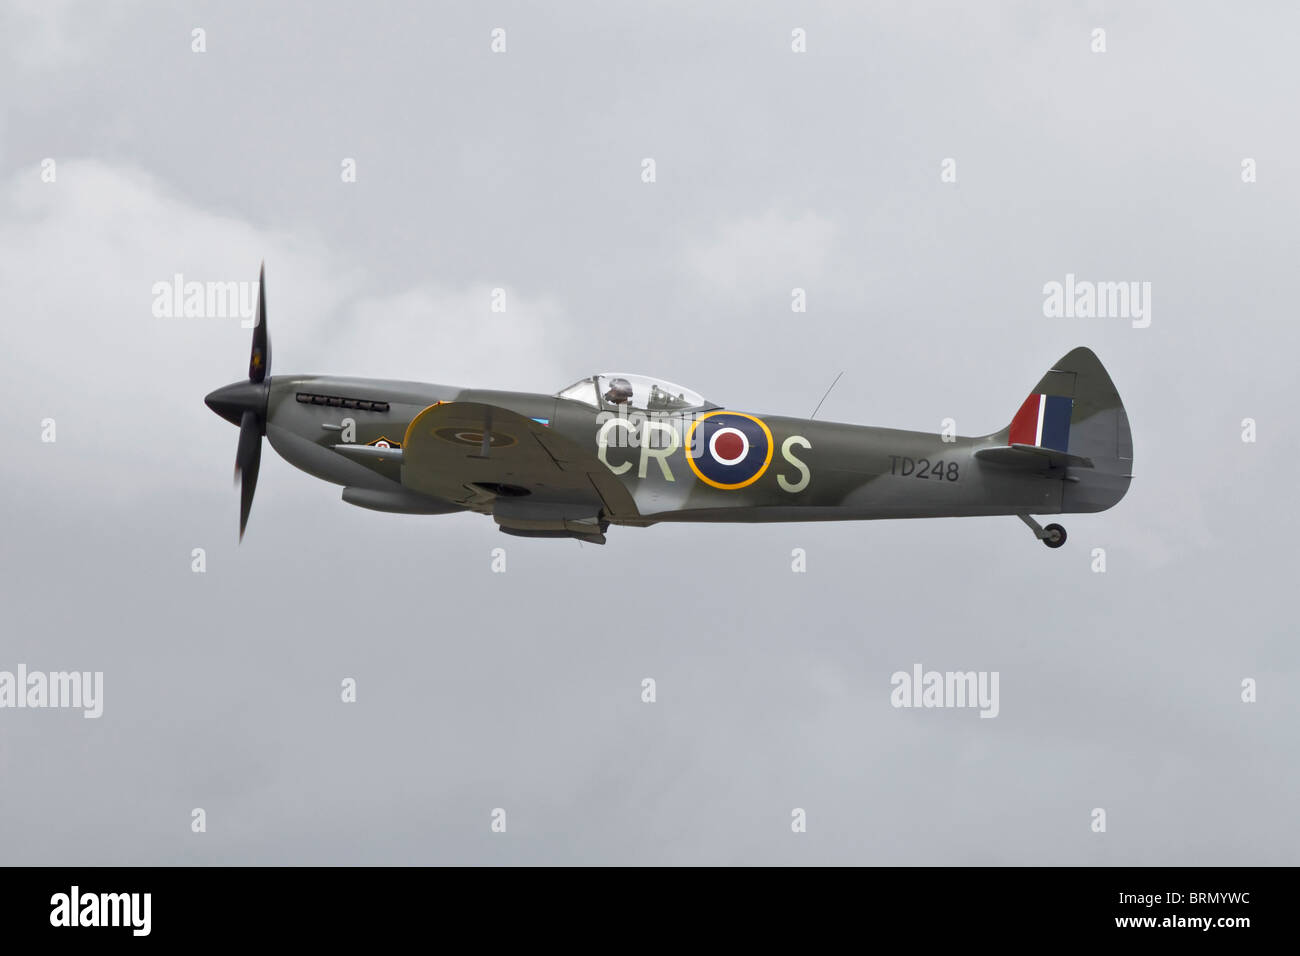 A Vickers Supermarine Spitfire RAF fighter of WW2 Stock Photo